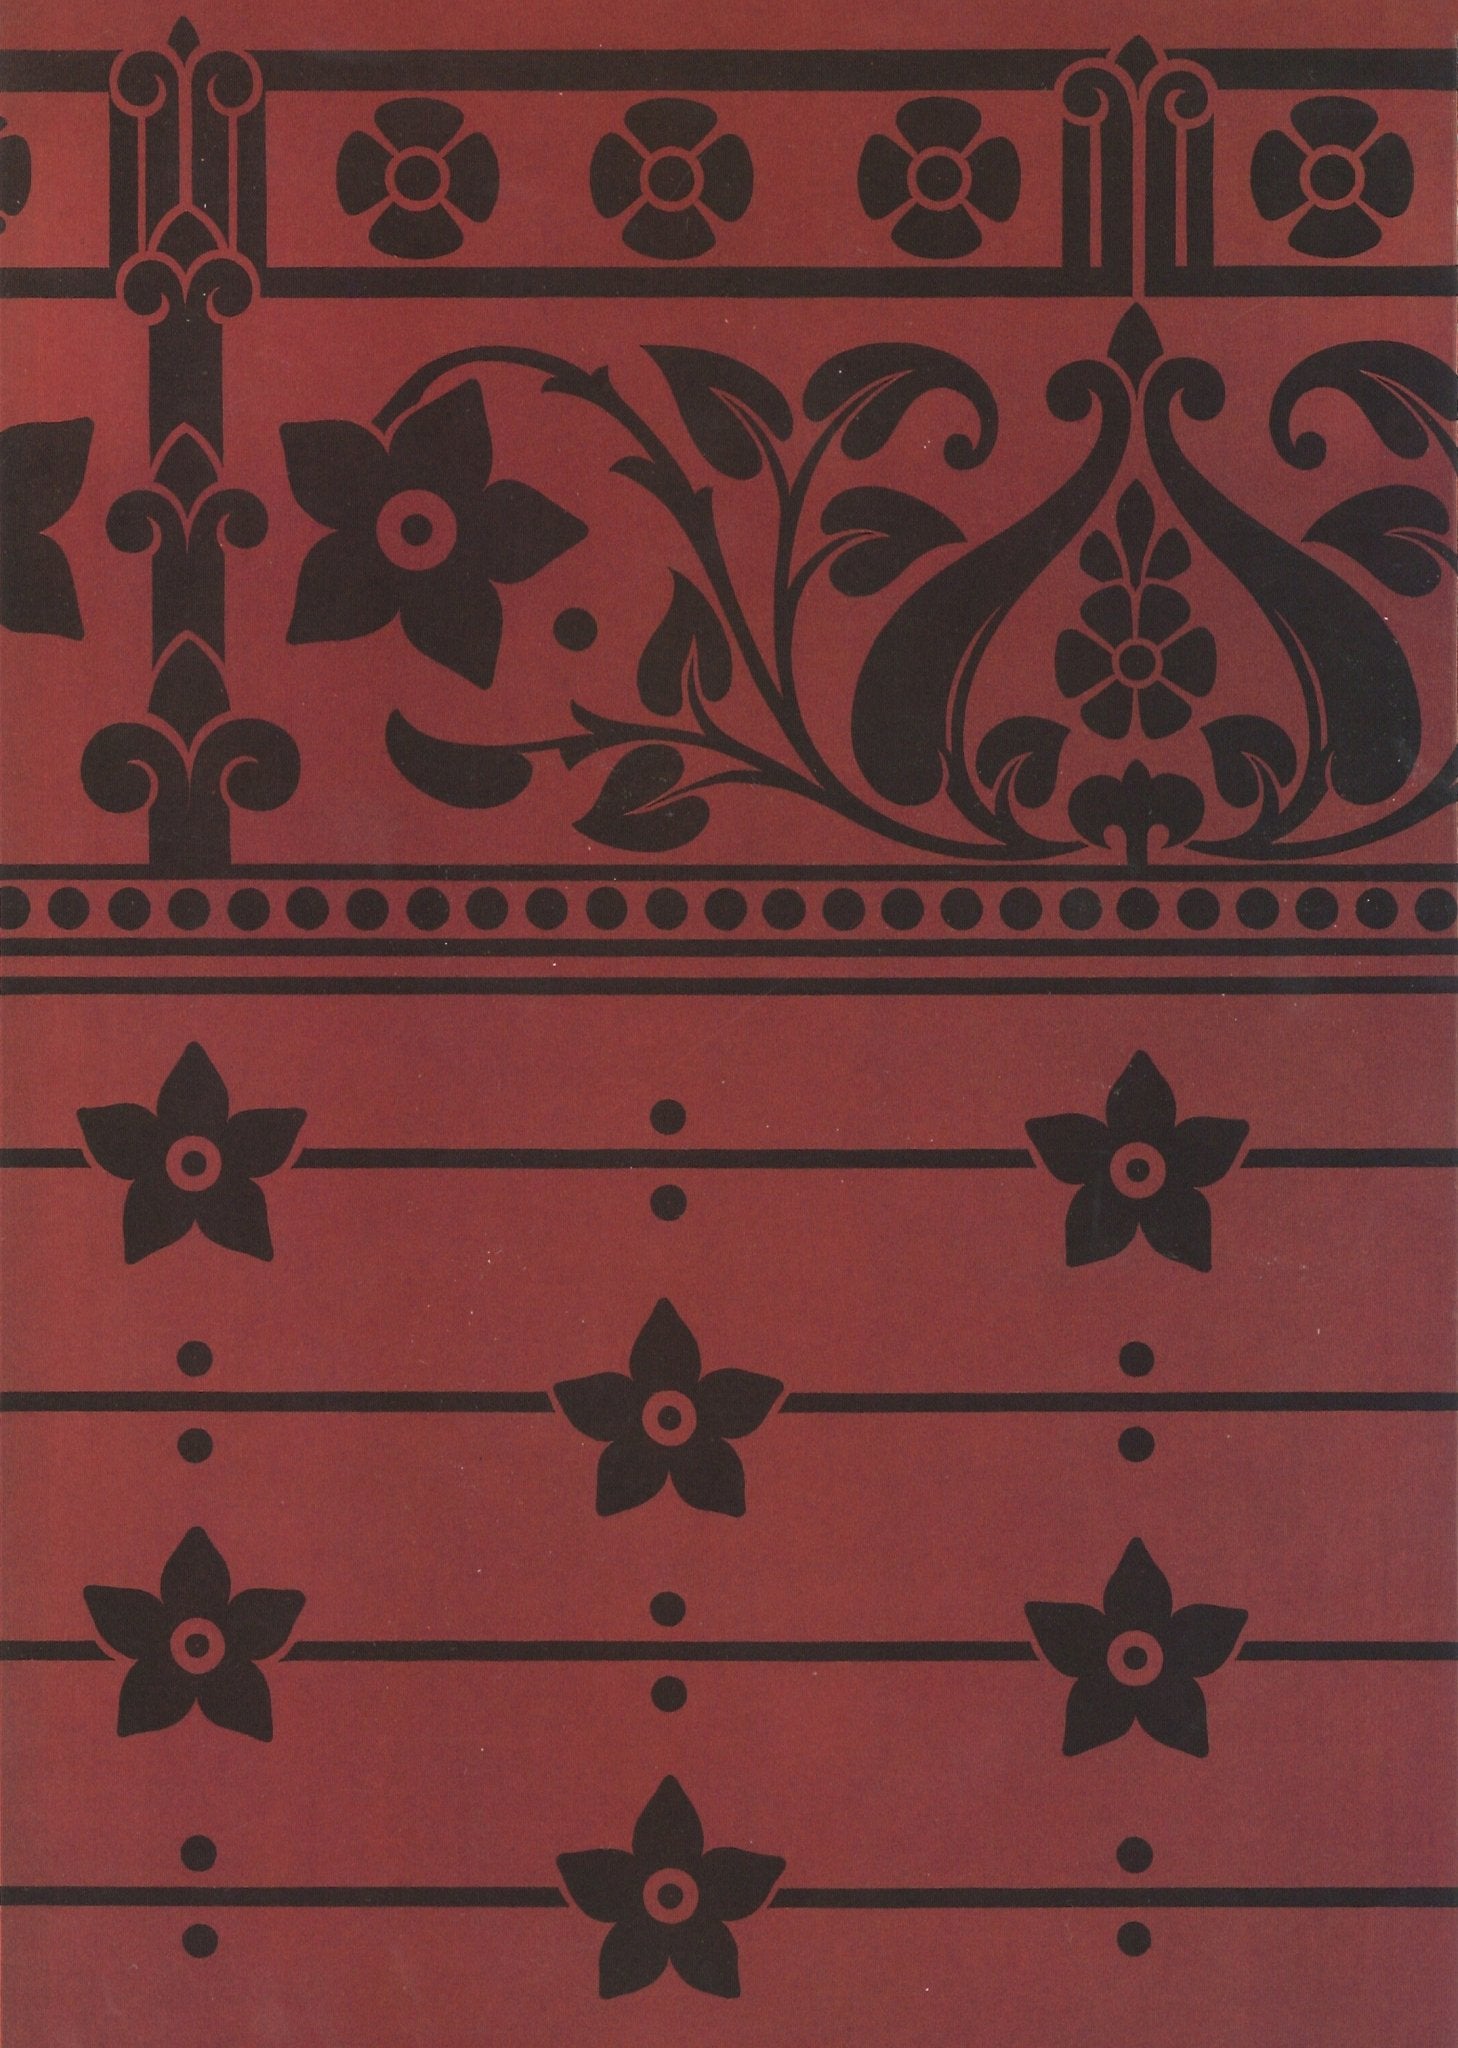 The source image for this pattern from Christopher Dresser's "Studies in Design"" , c.1875.